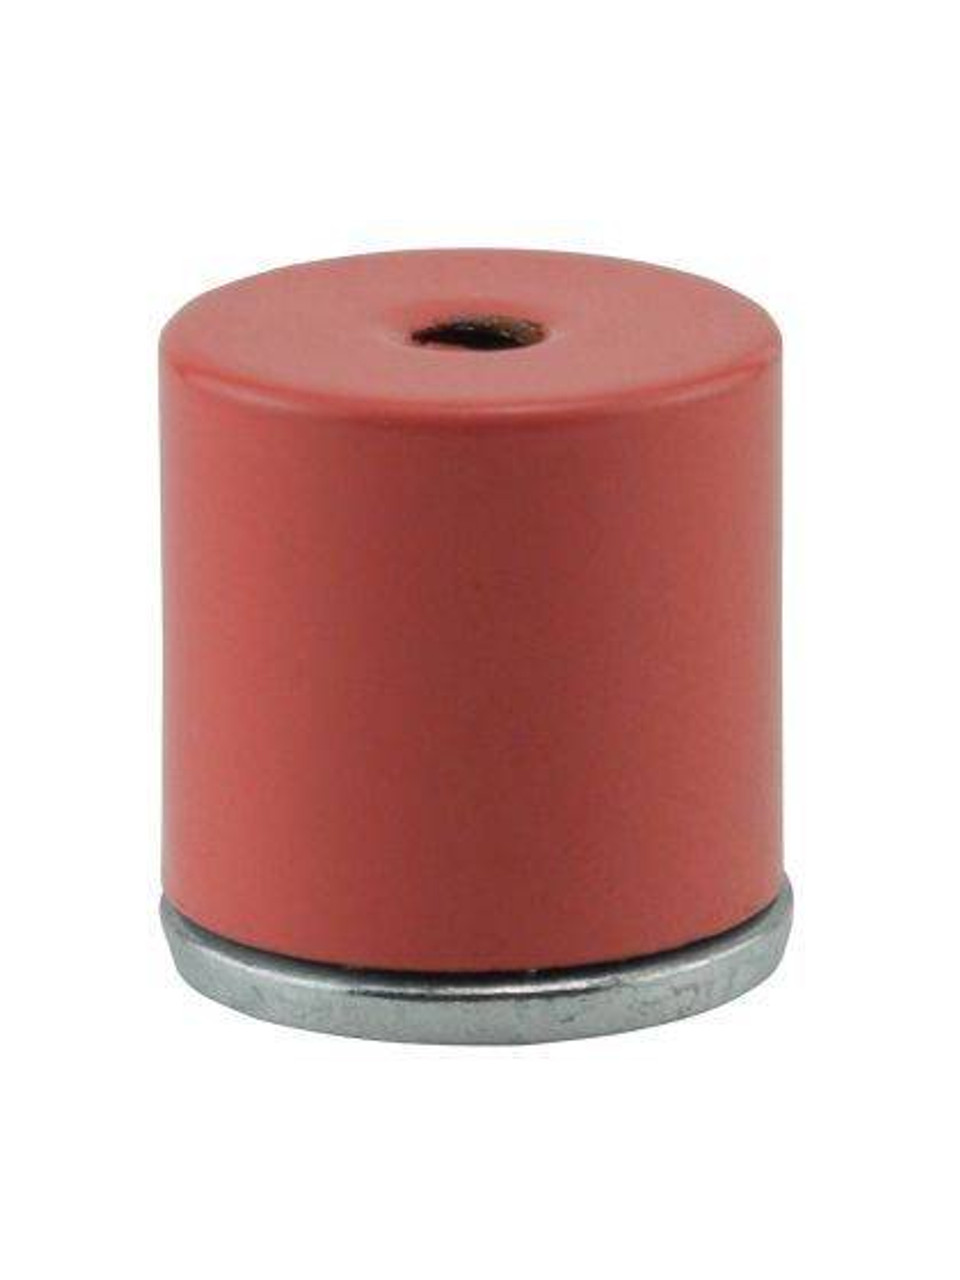 General Alnico Pot-style Magnet with 18 Lb. Pull 374C